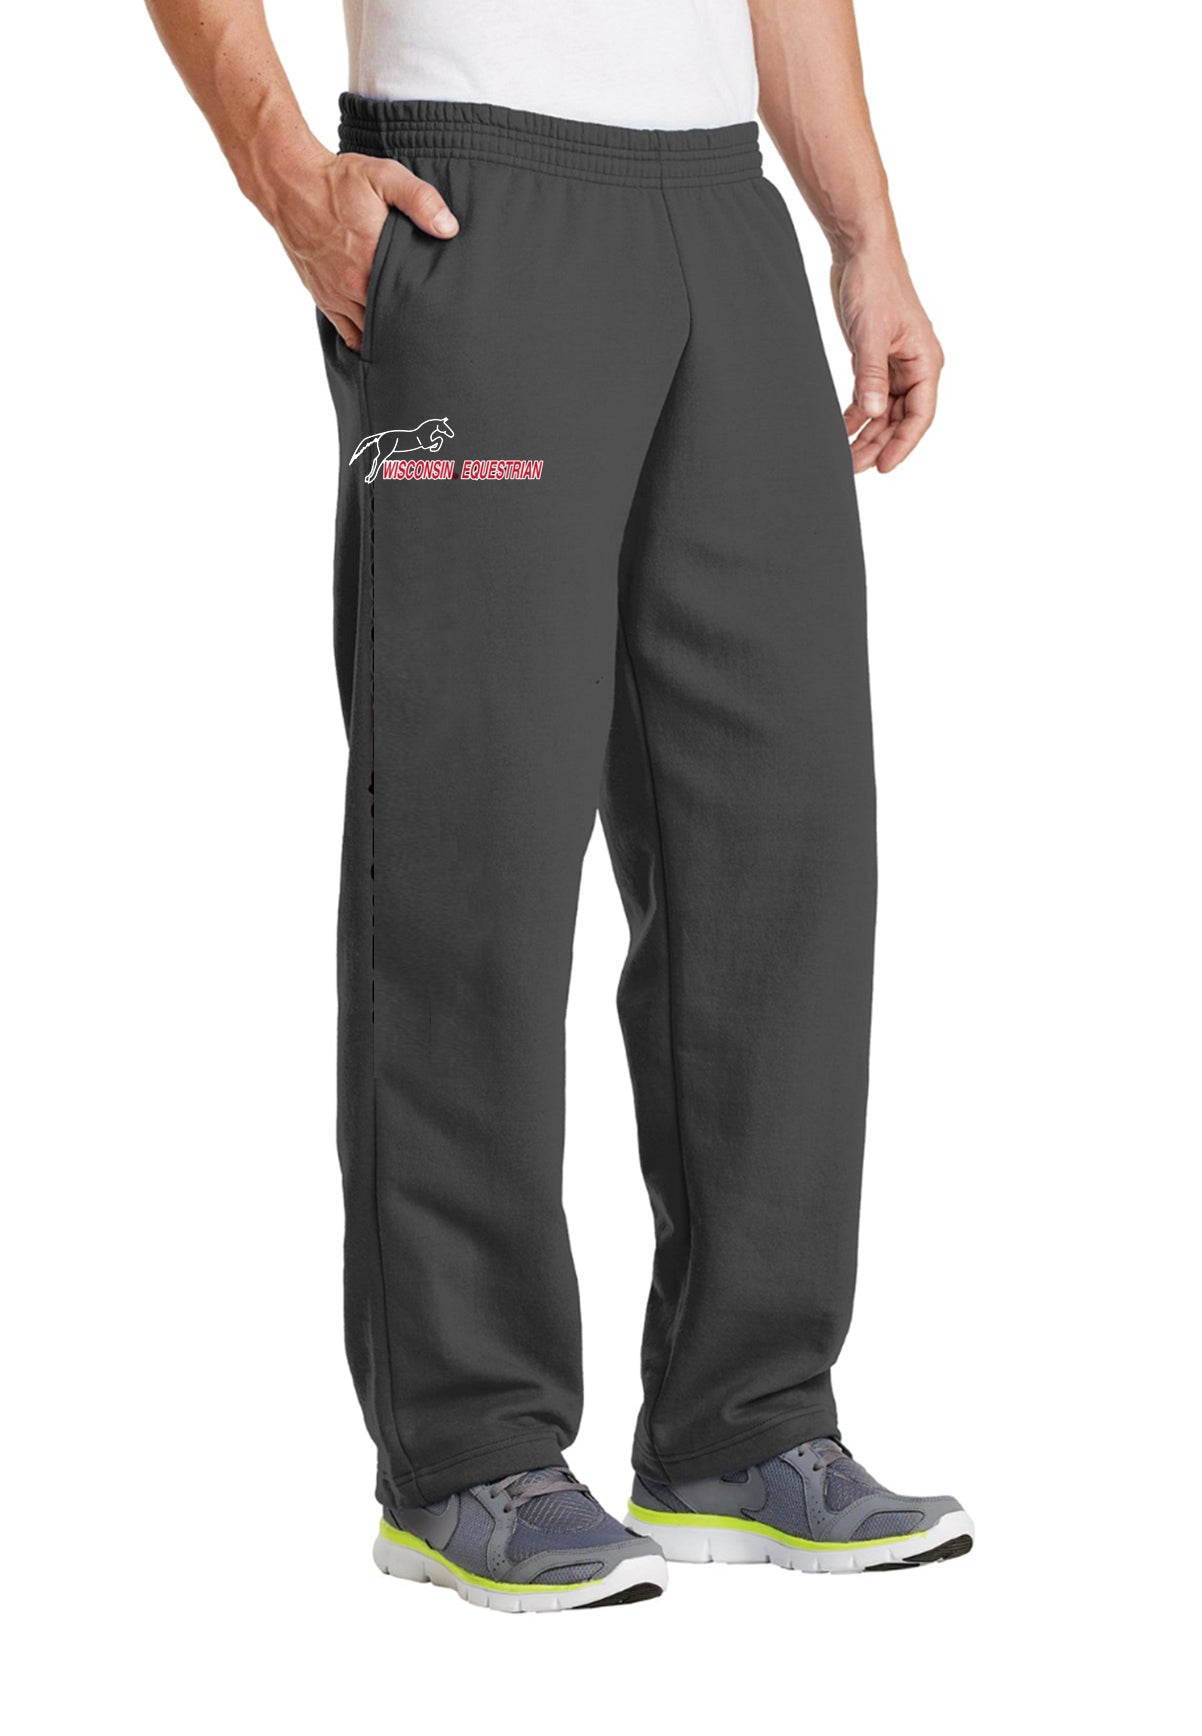 Wisconsin Equestrian Team Core Fleece Sweatpant with Pockets (Unisex) - Black or Charcoal